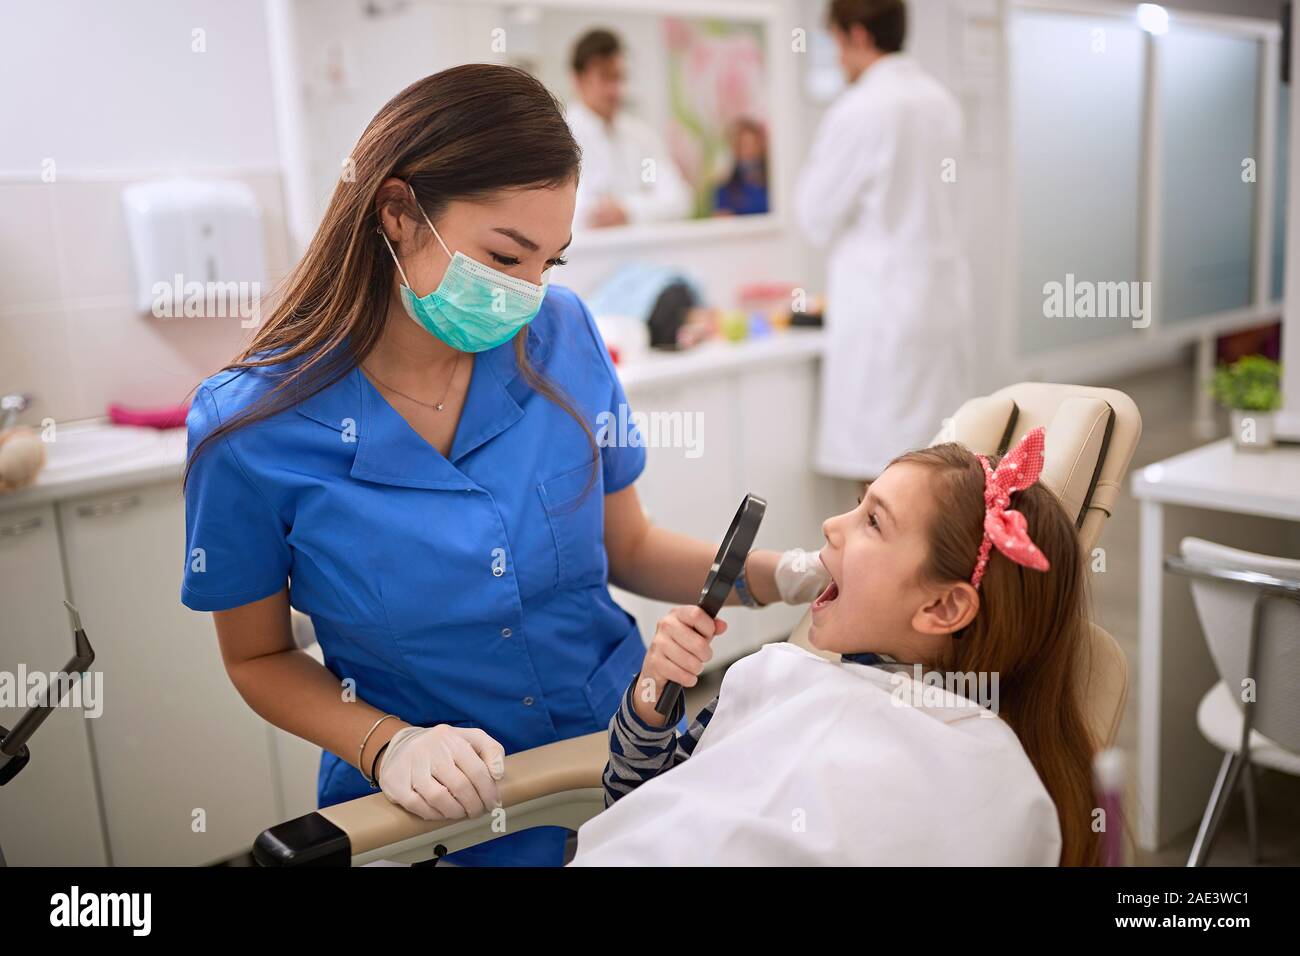 Child in dental chair hold magnifying glass near open mouth Stock Photo